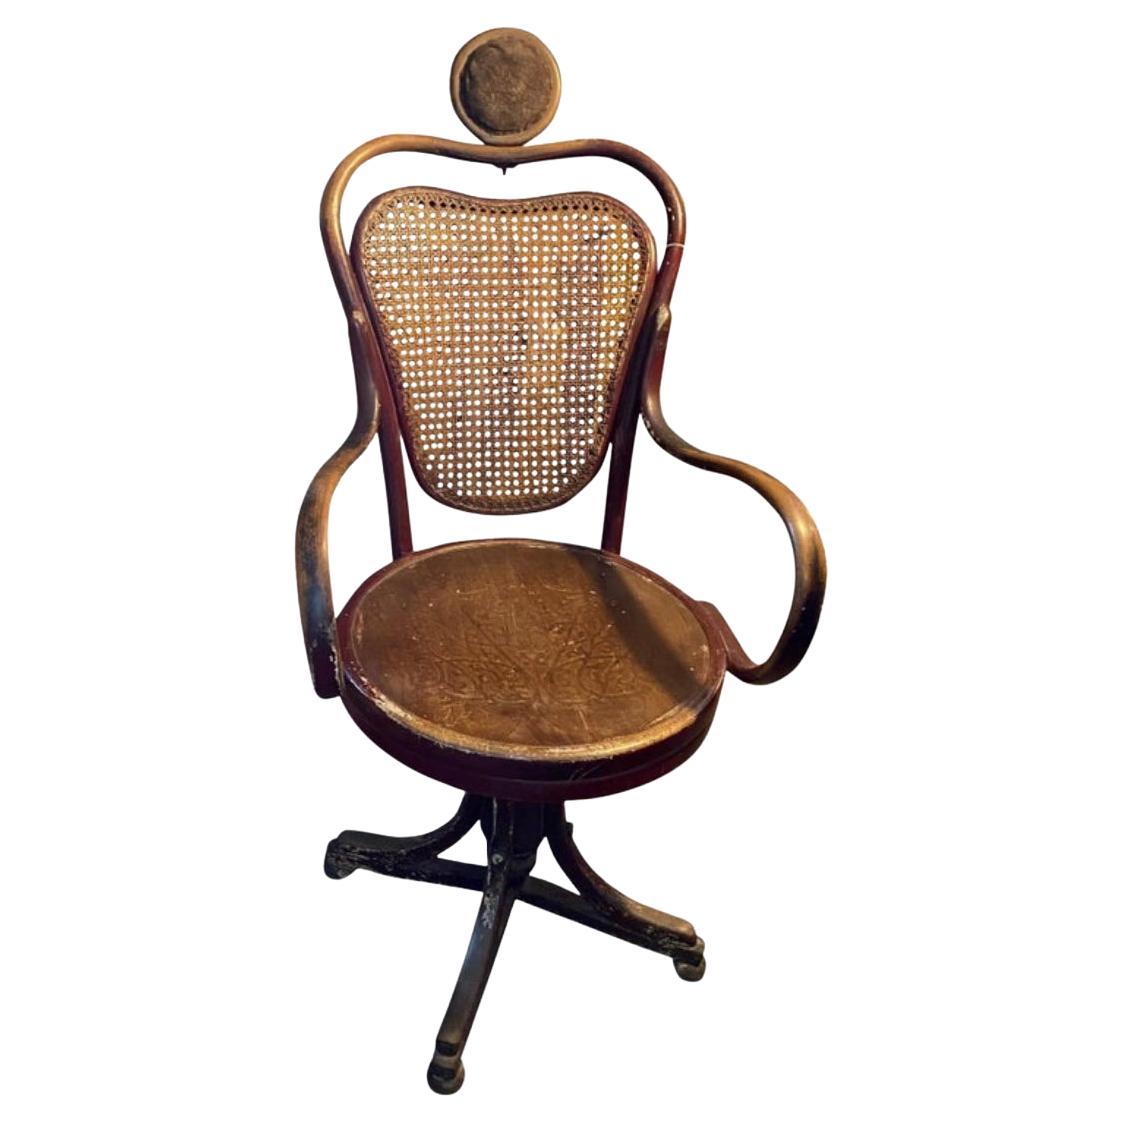 Early 20th Century Art Nouveau Wood and Wicker Tonet Italian Swivel Barber Chair For Sale